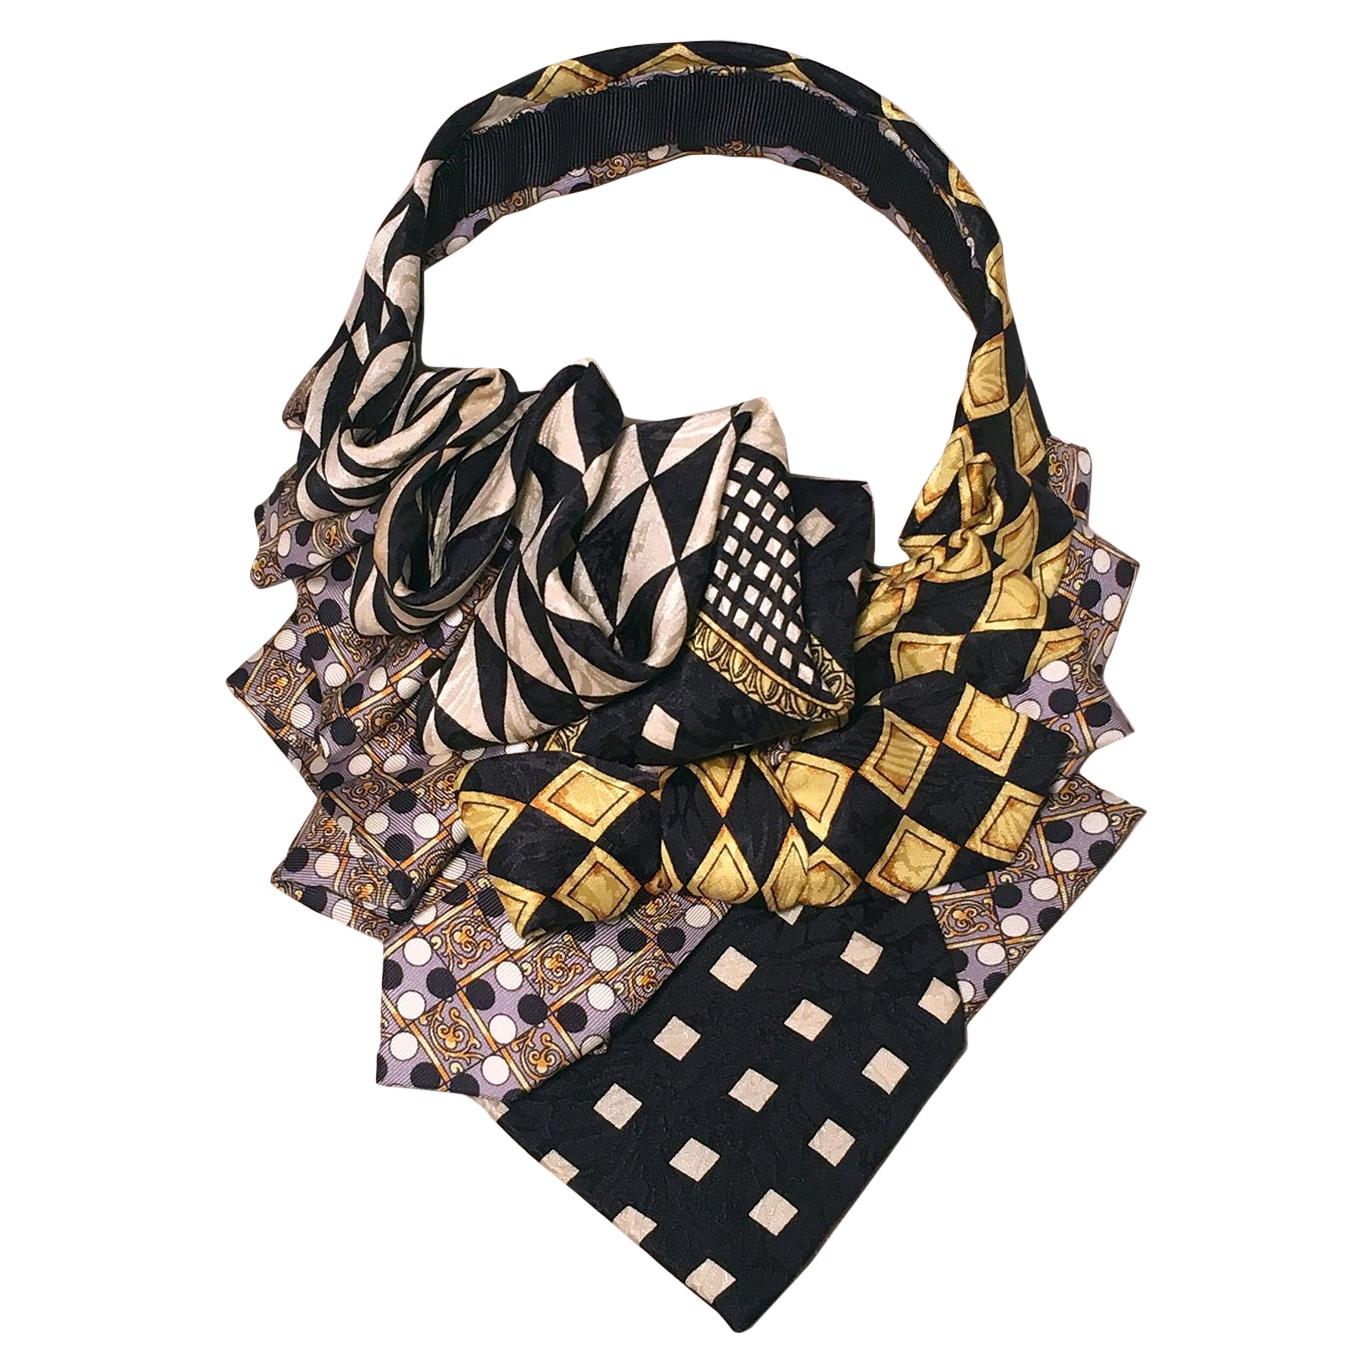 The Irresistible Ascot Vintage Versace Black and Yellow Silk Tie Necklace